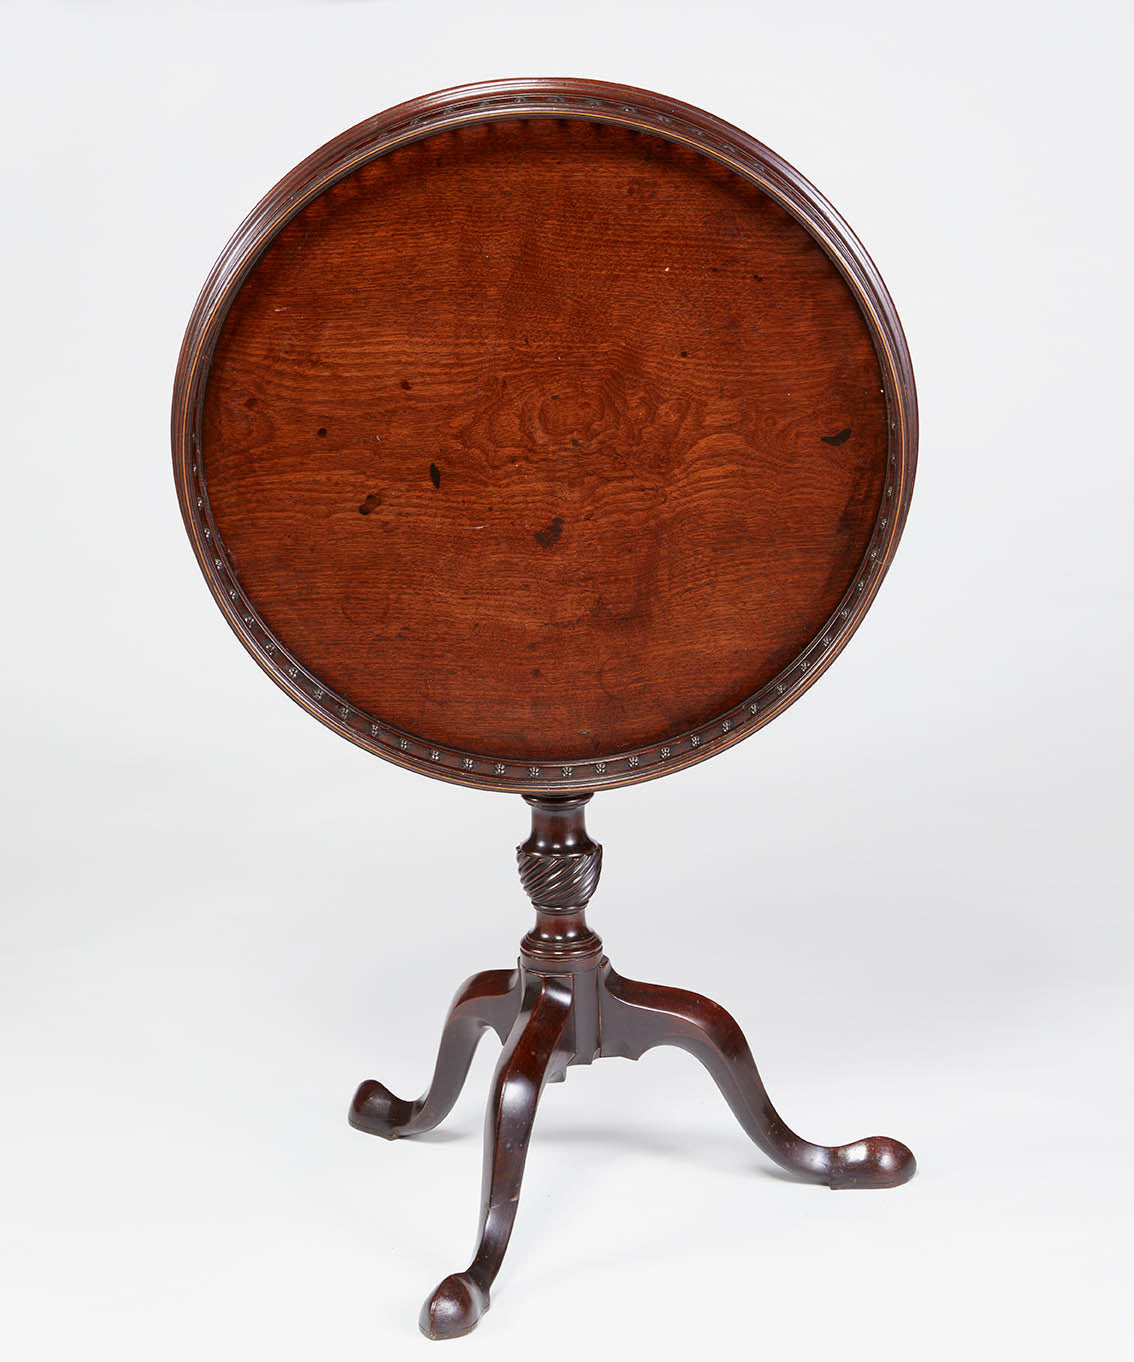 English mahogany tilt top tripod table with gallery top